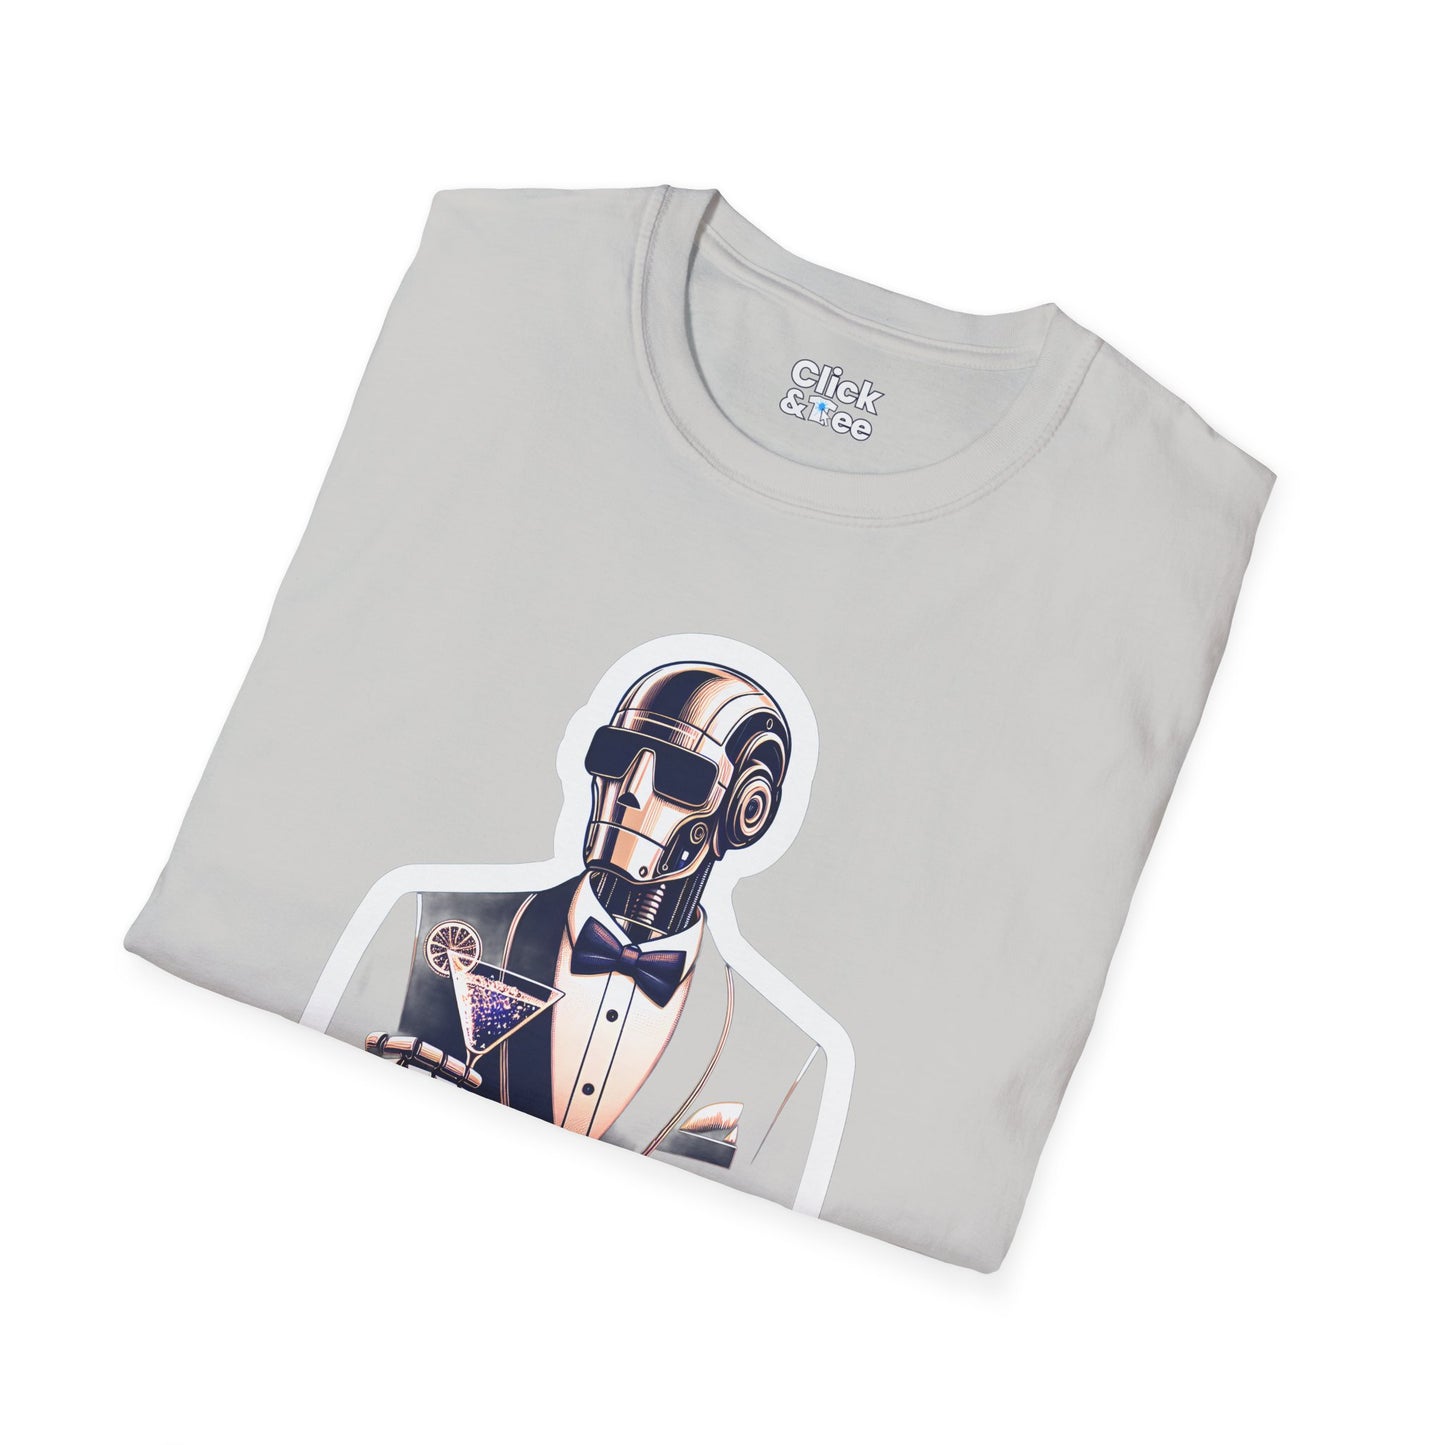 Copy of Retro T-Shirt - Classy Well Dressed Robot Bartender Serving a cocktail - Retro Style T-Shirt